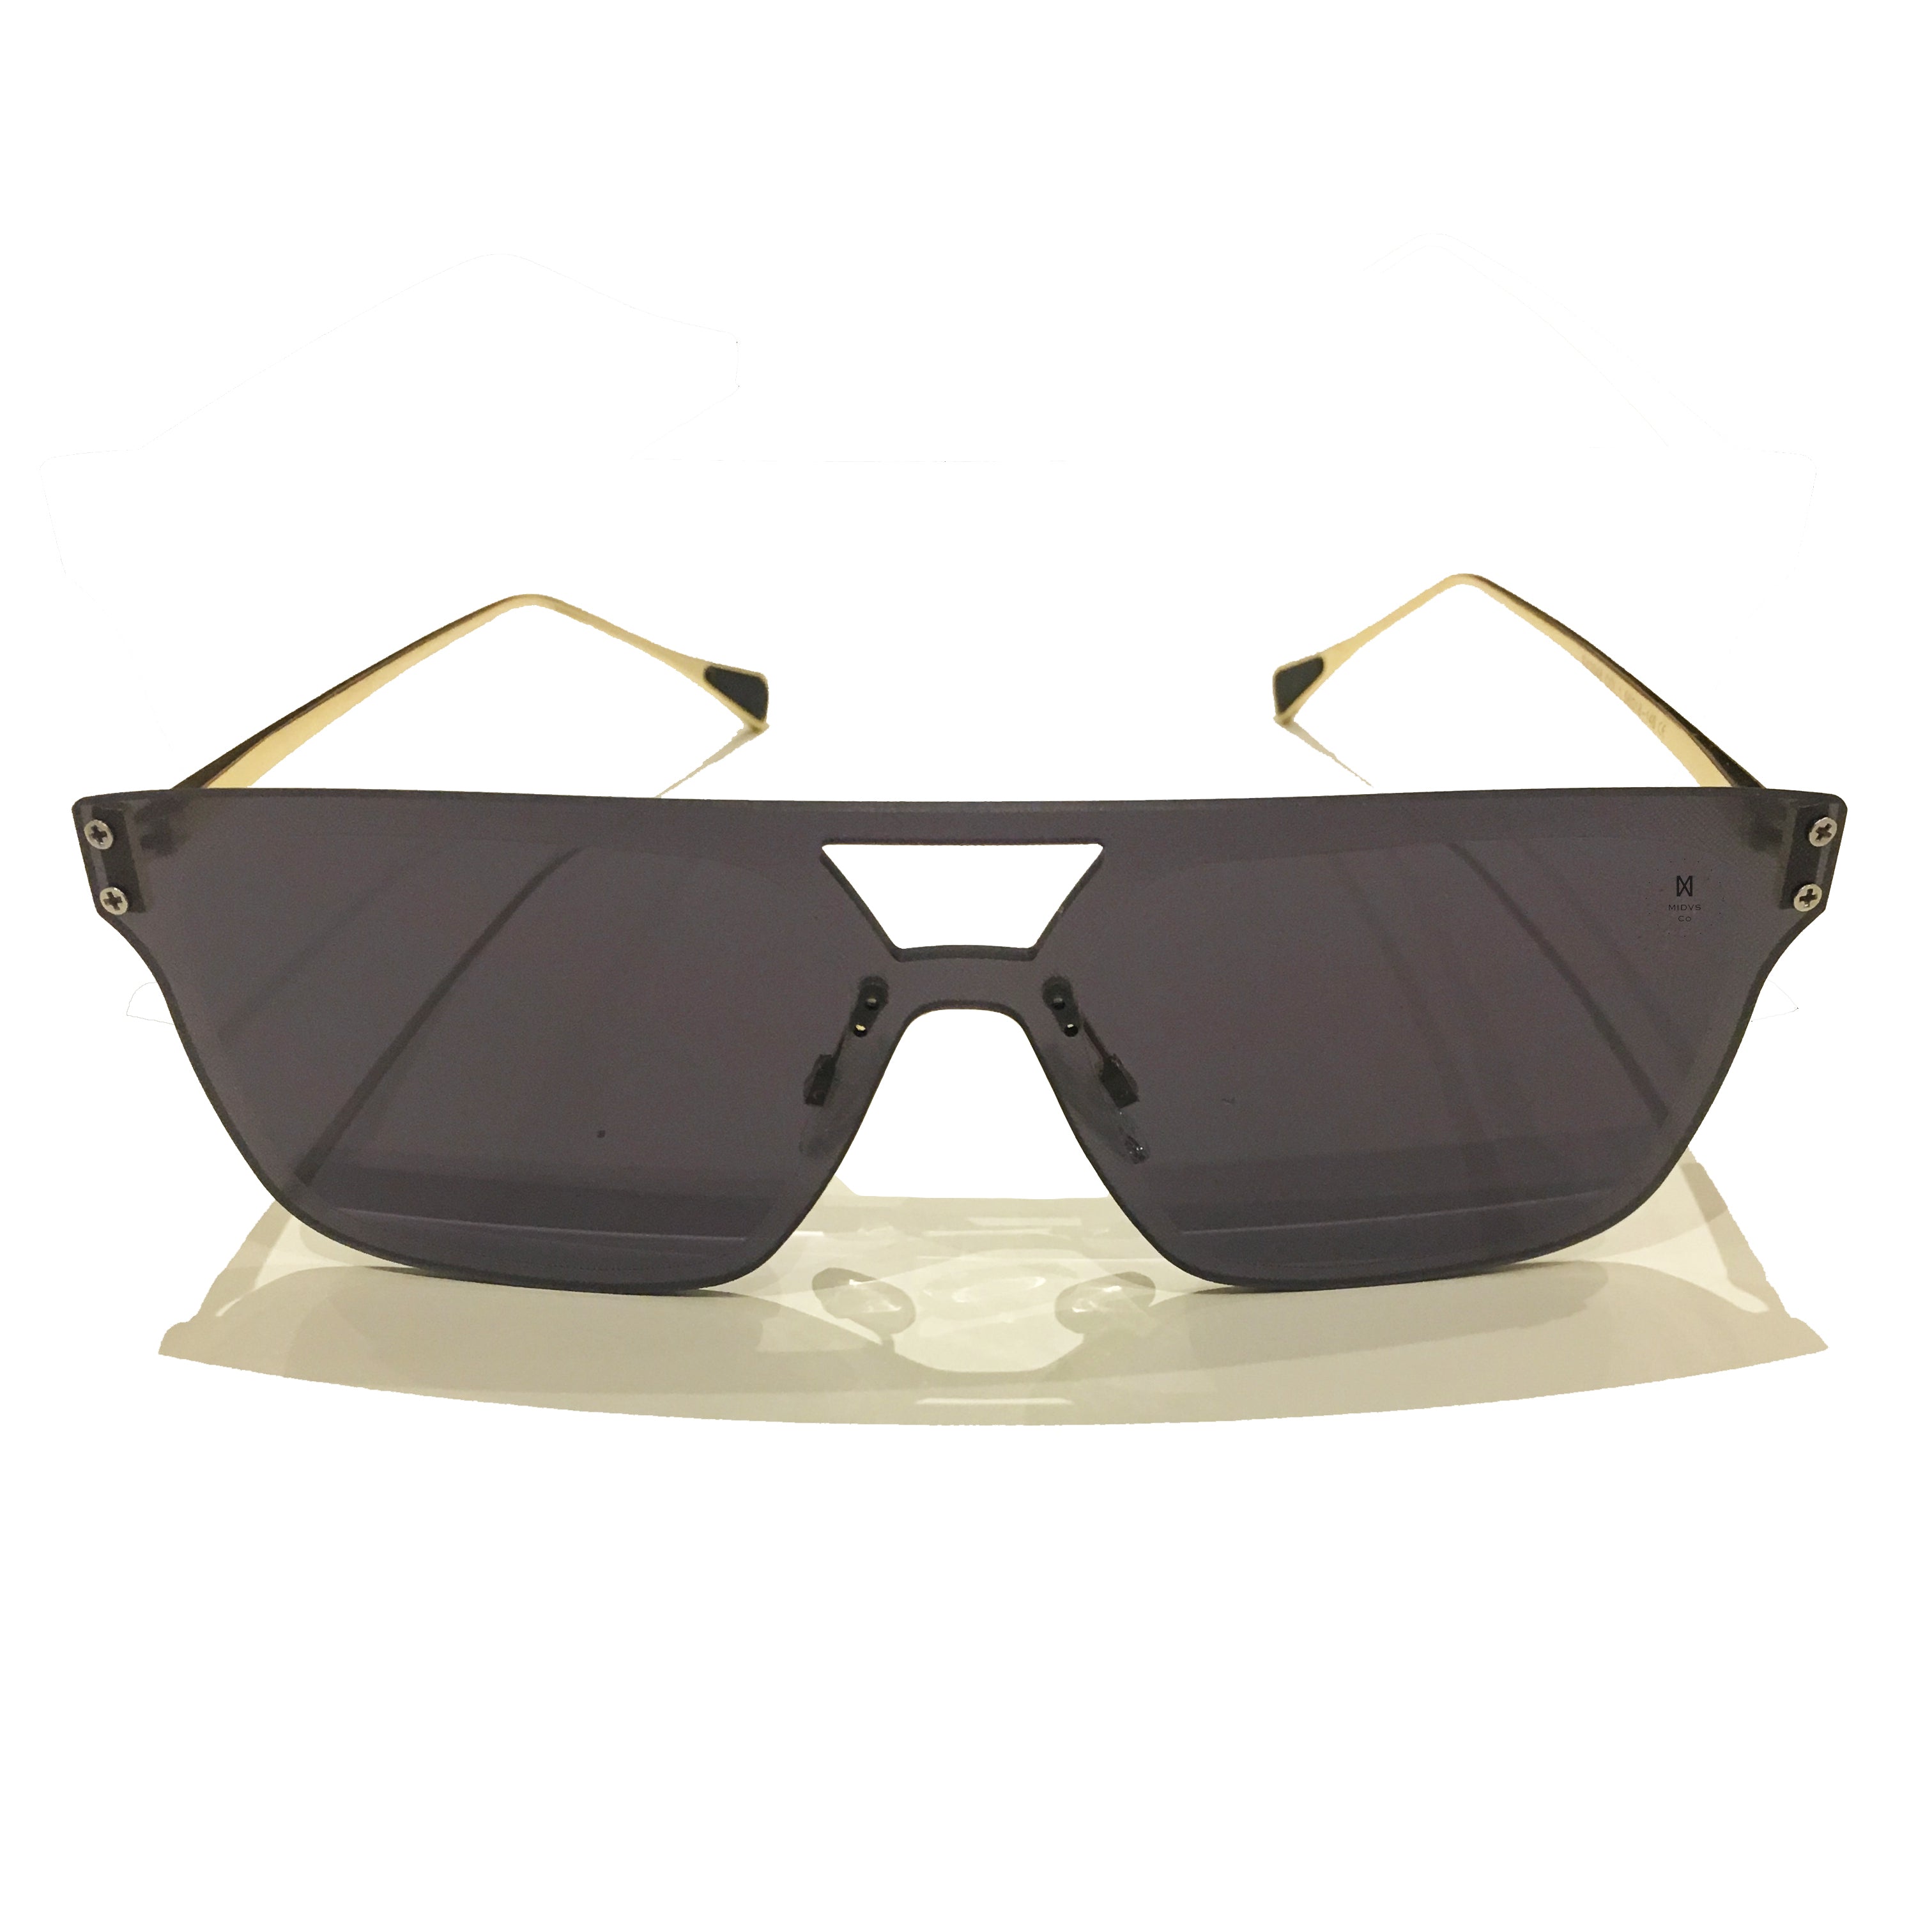 The Kilo Shades Black / Gold by Midvs Co